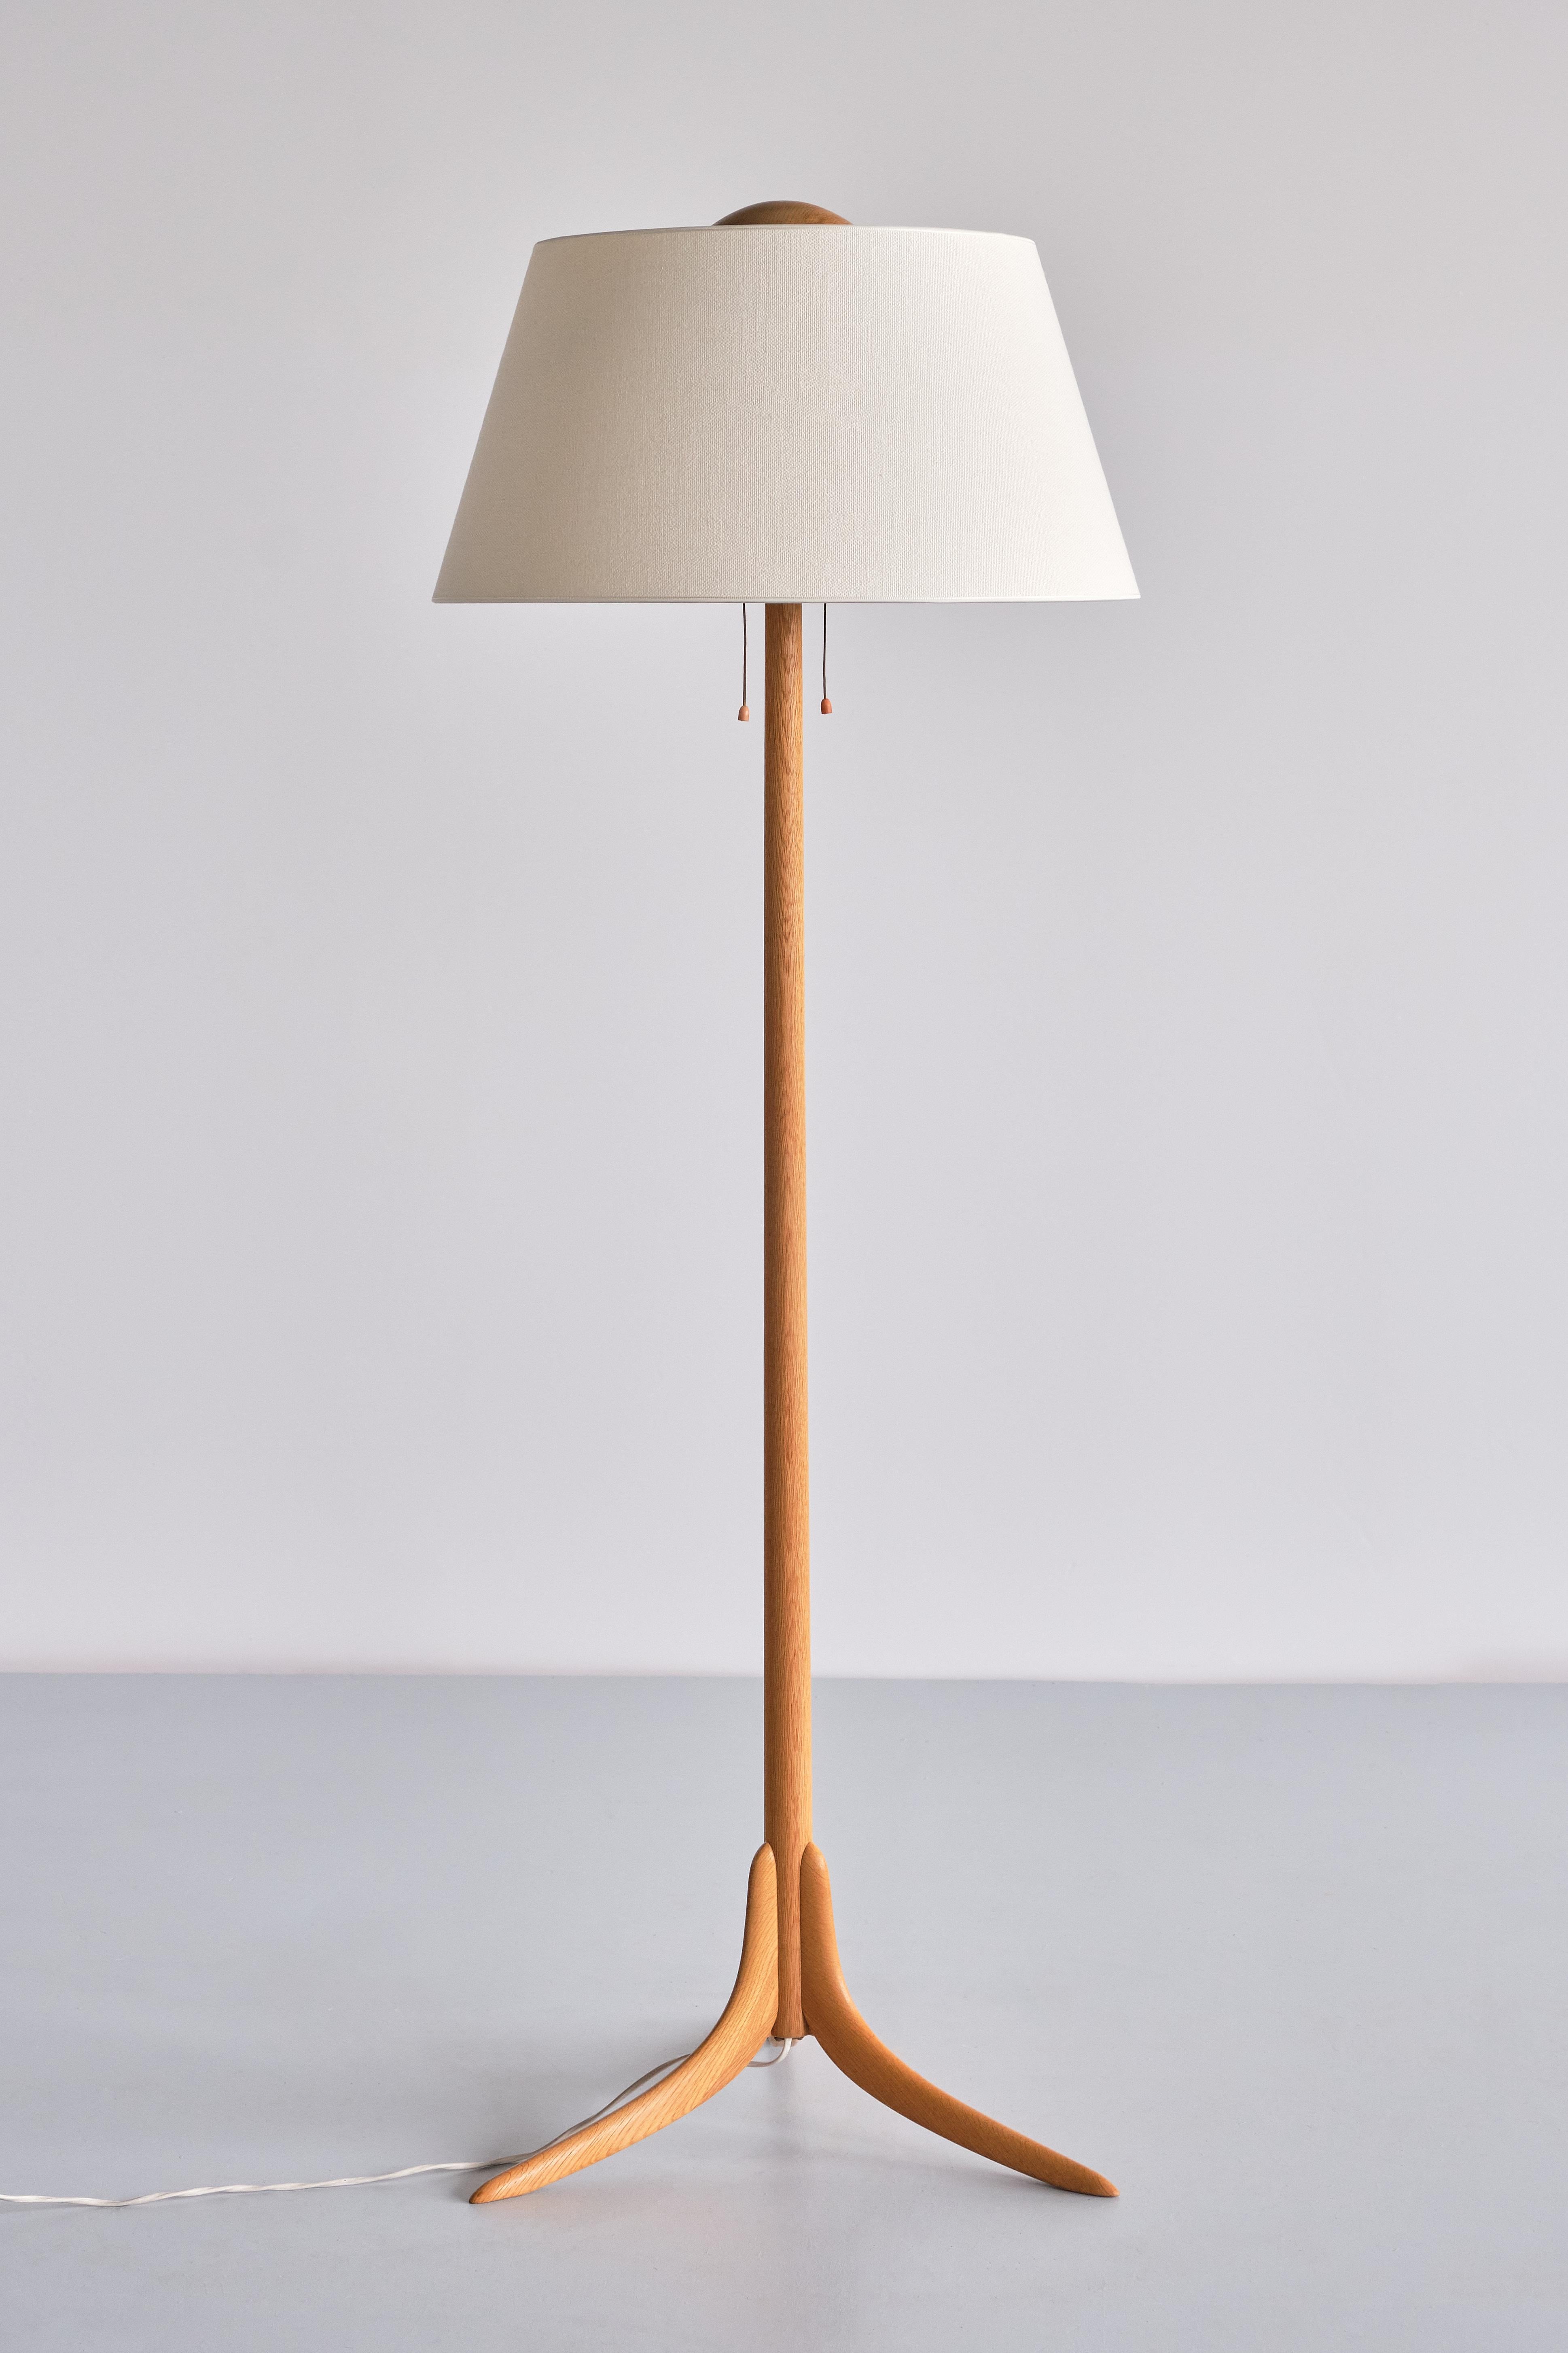 This striking Scandinavian Modern floor lamp was produced by the Swedish company Svensk Hemslöjd in the 1950s.
The design is marked by the elegant three legged base, with curved outward bending legs. The base and central round stem are made of solid